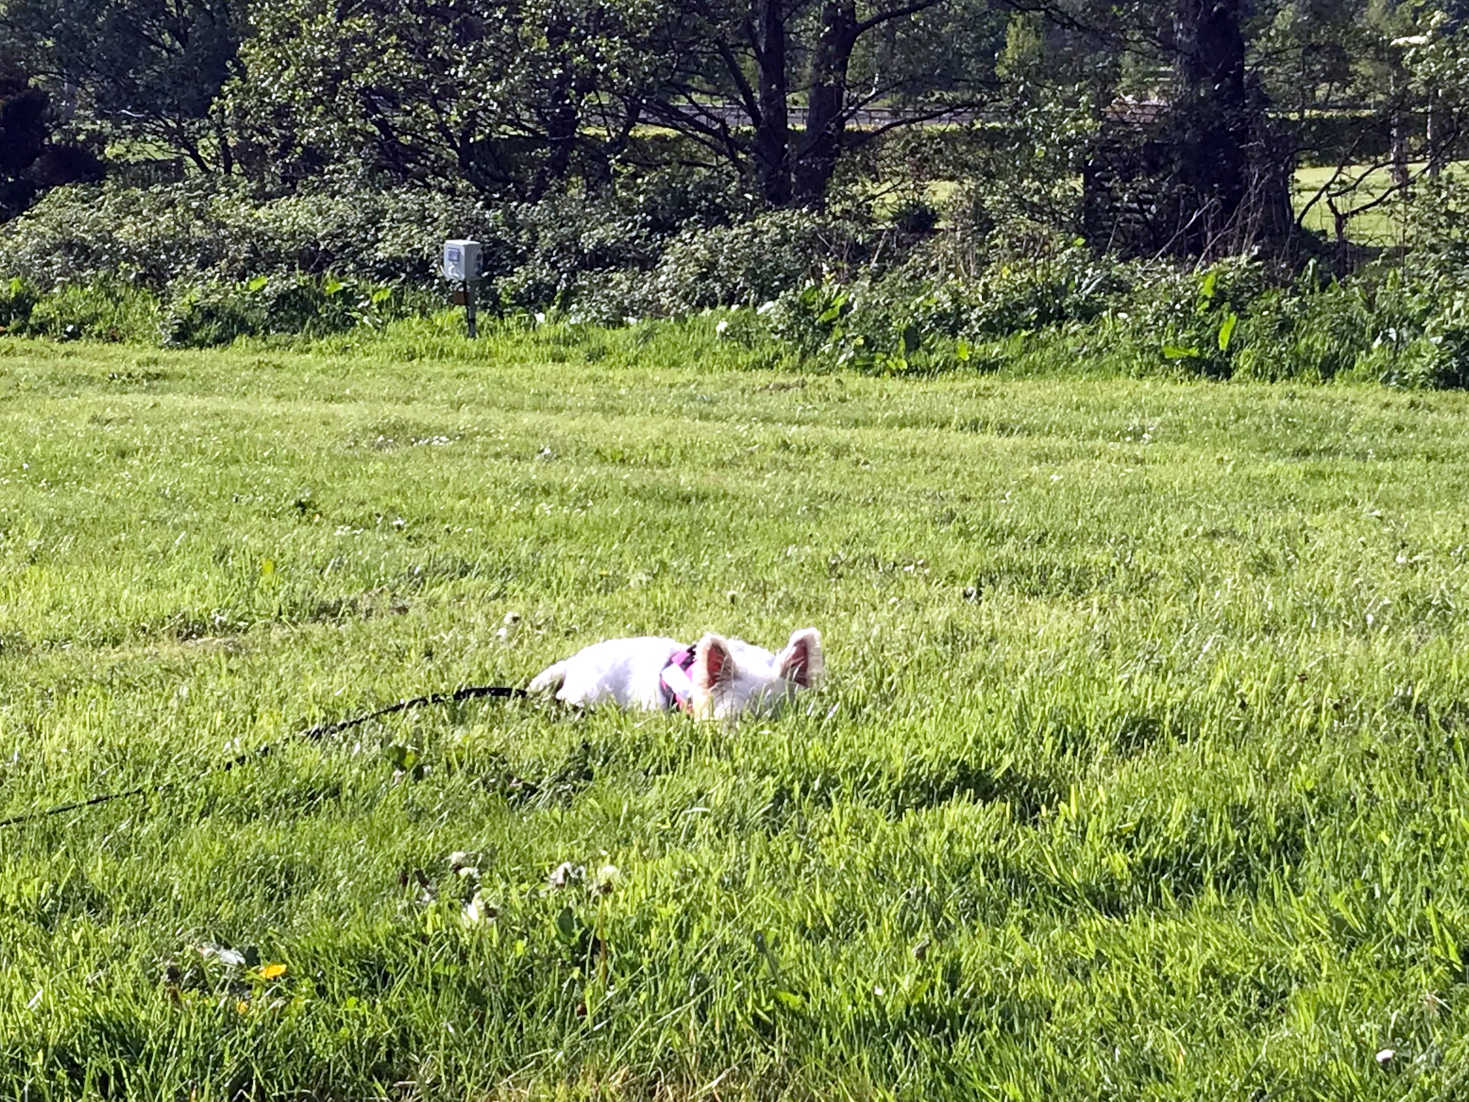 poppy the westie finds a comfy spot on the grass